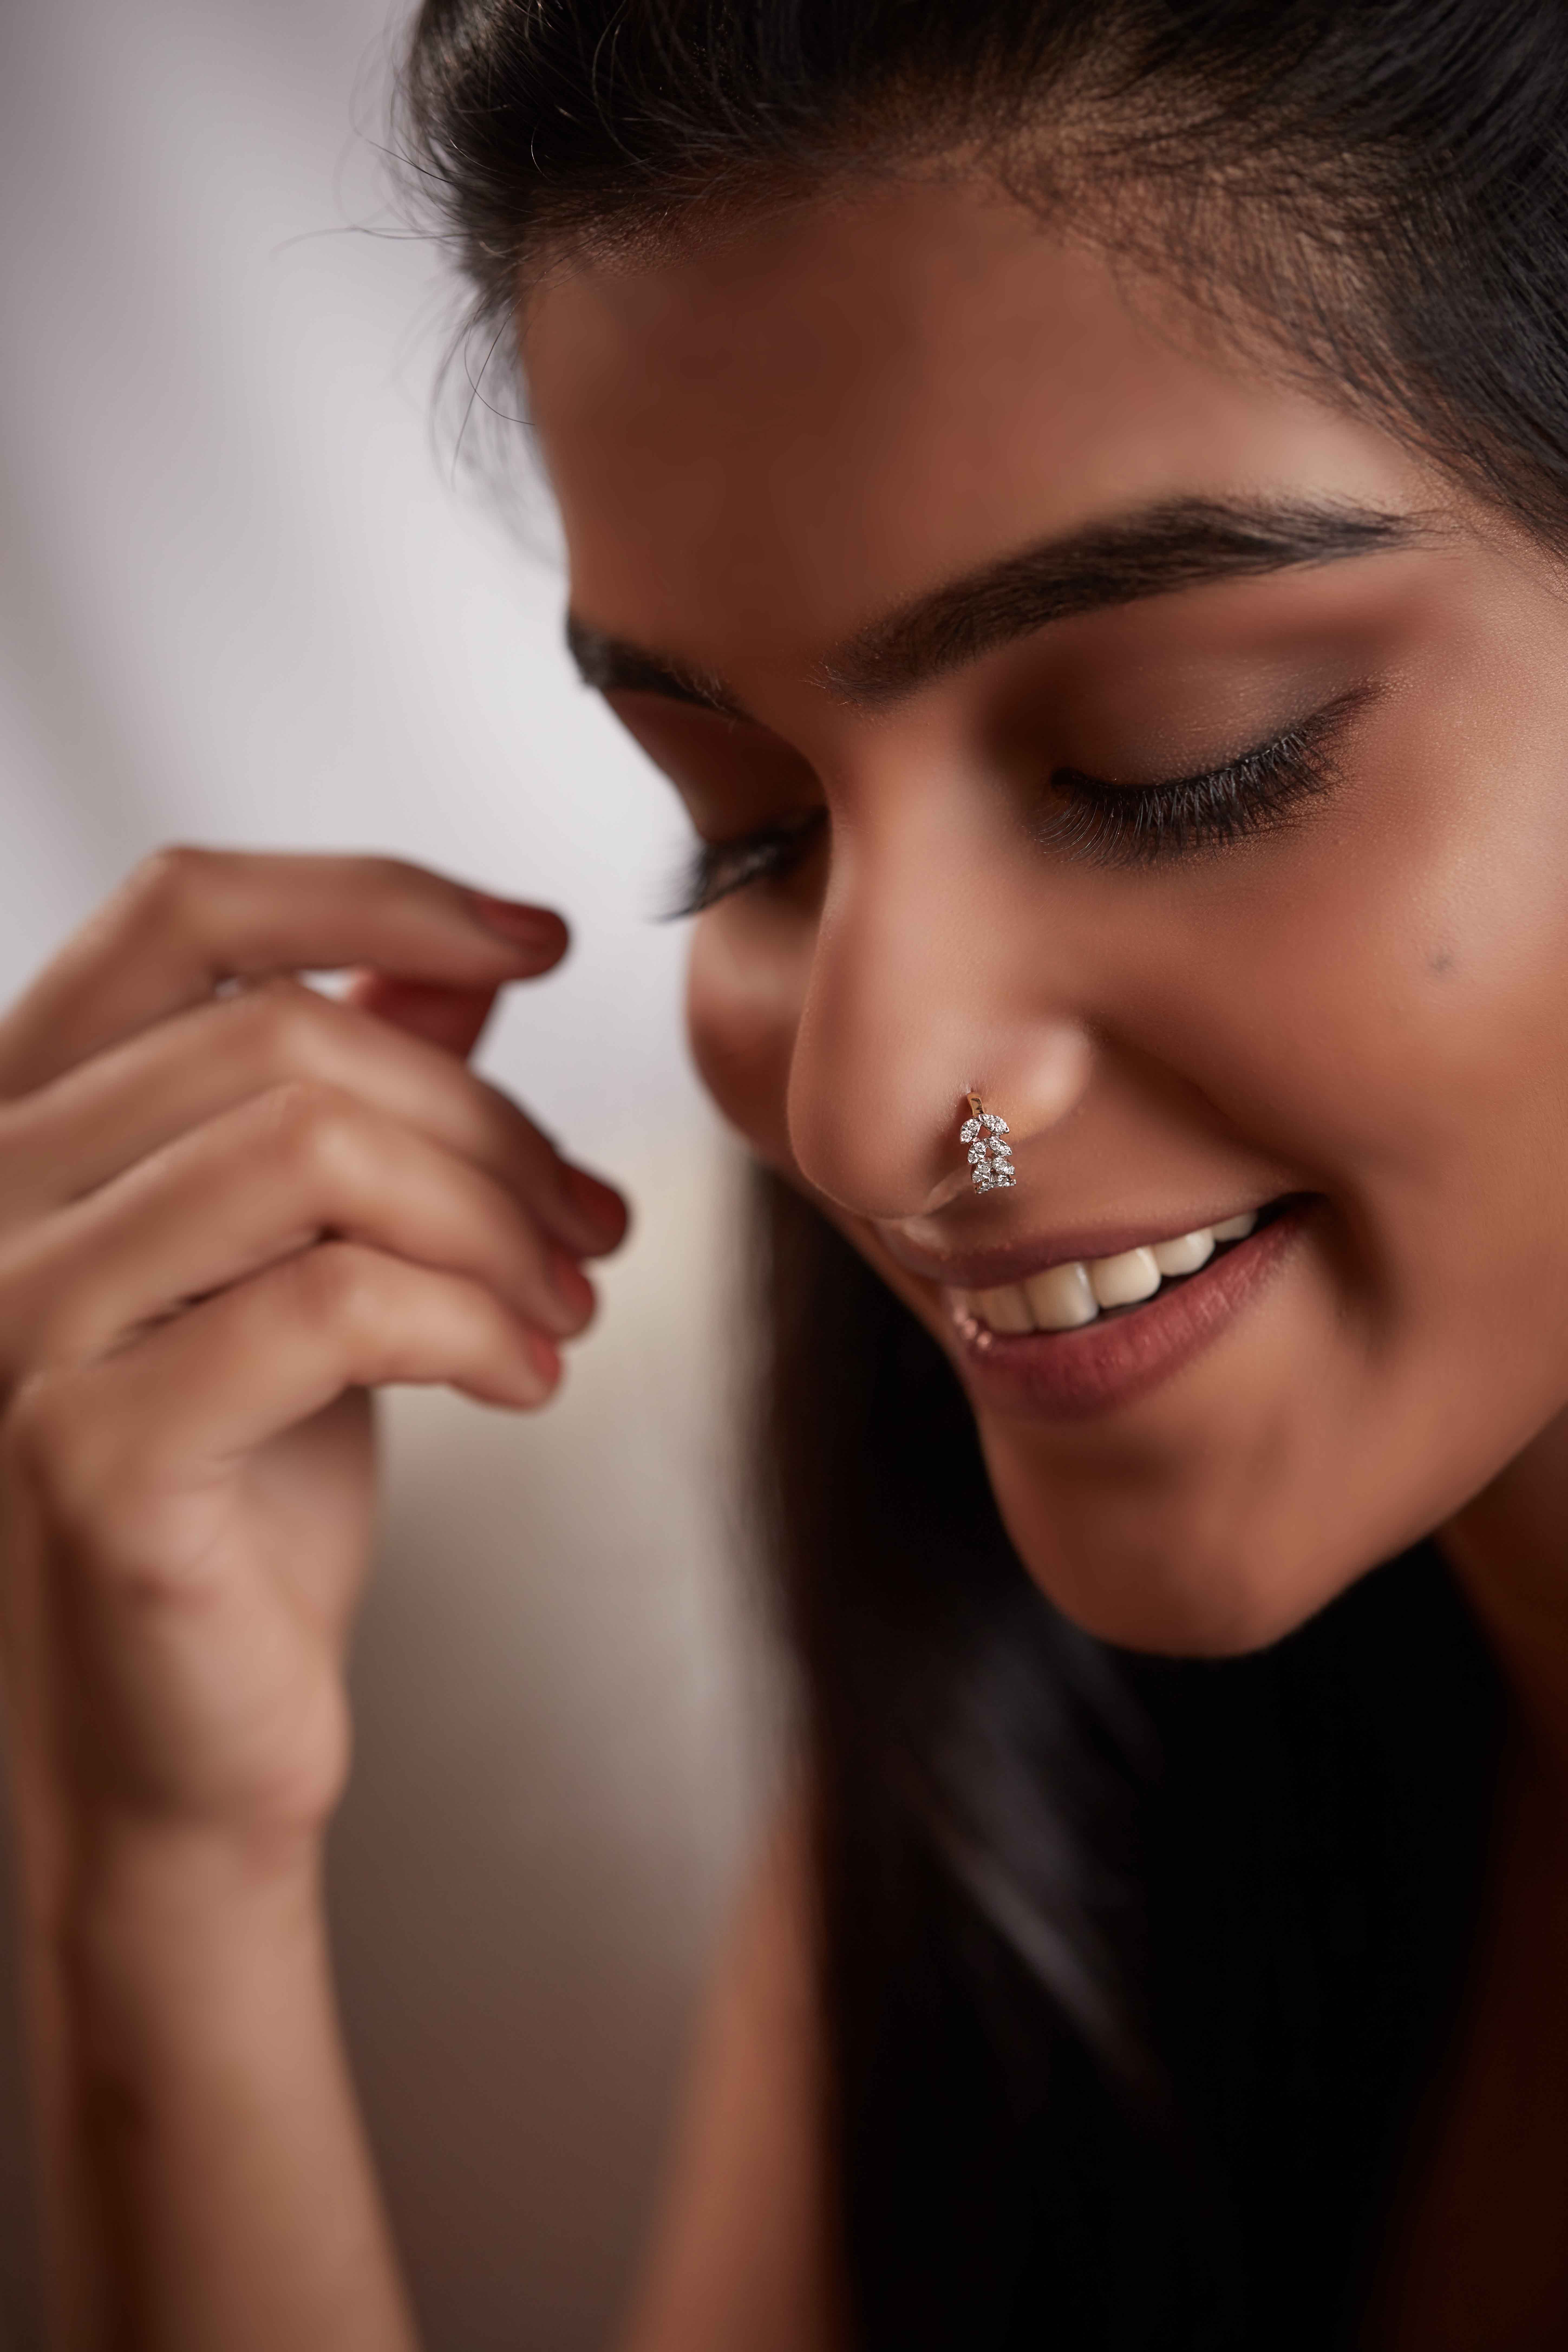 Best Nose Ring Images In 2020 Simple Craft Idea, 42% OFF